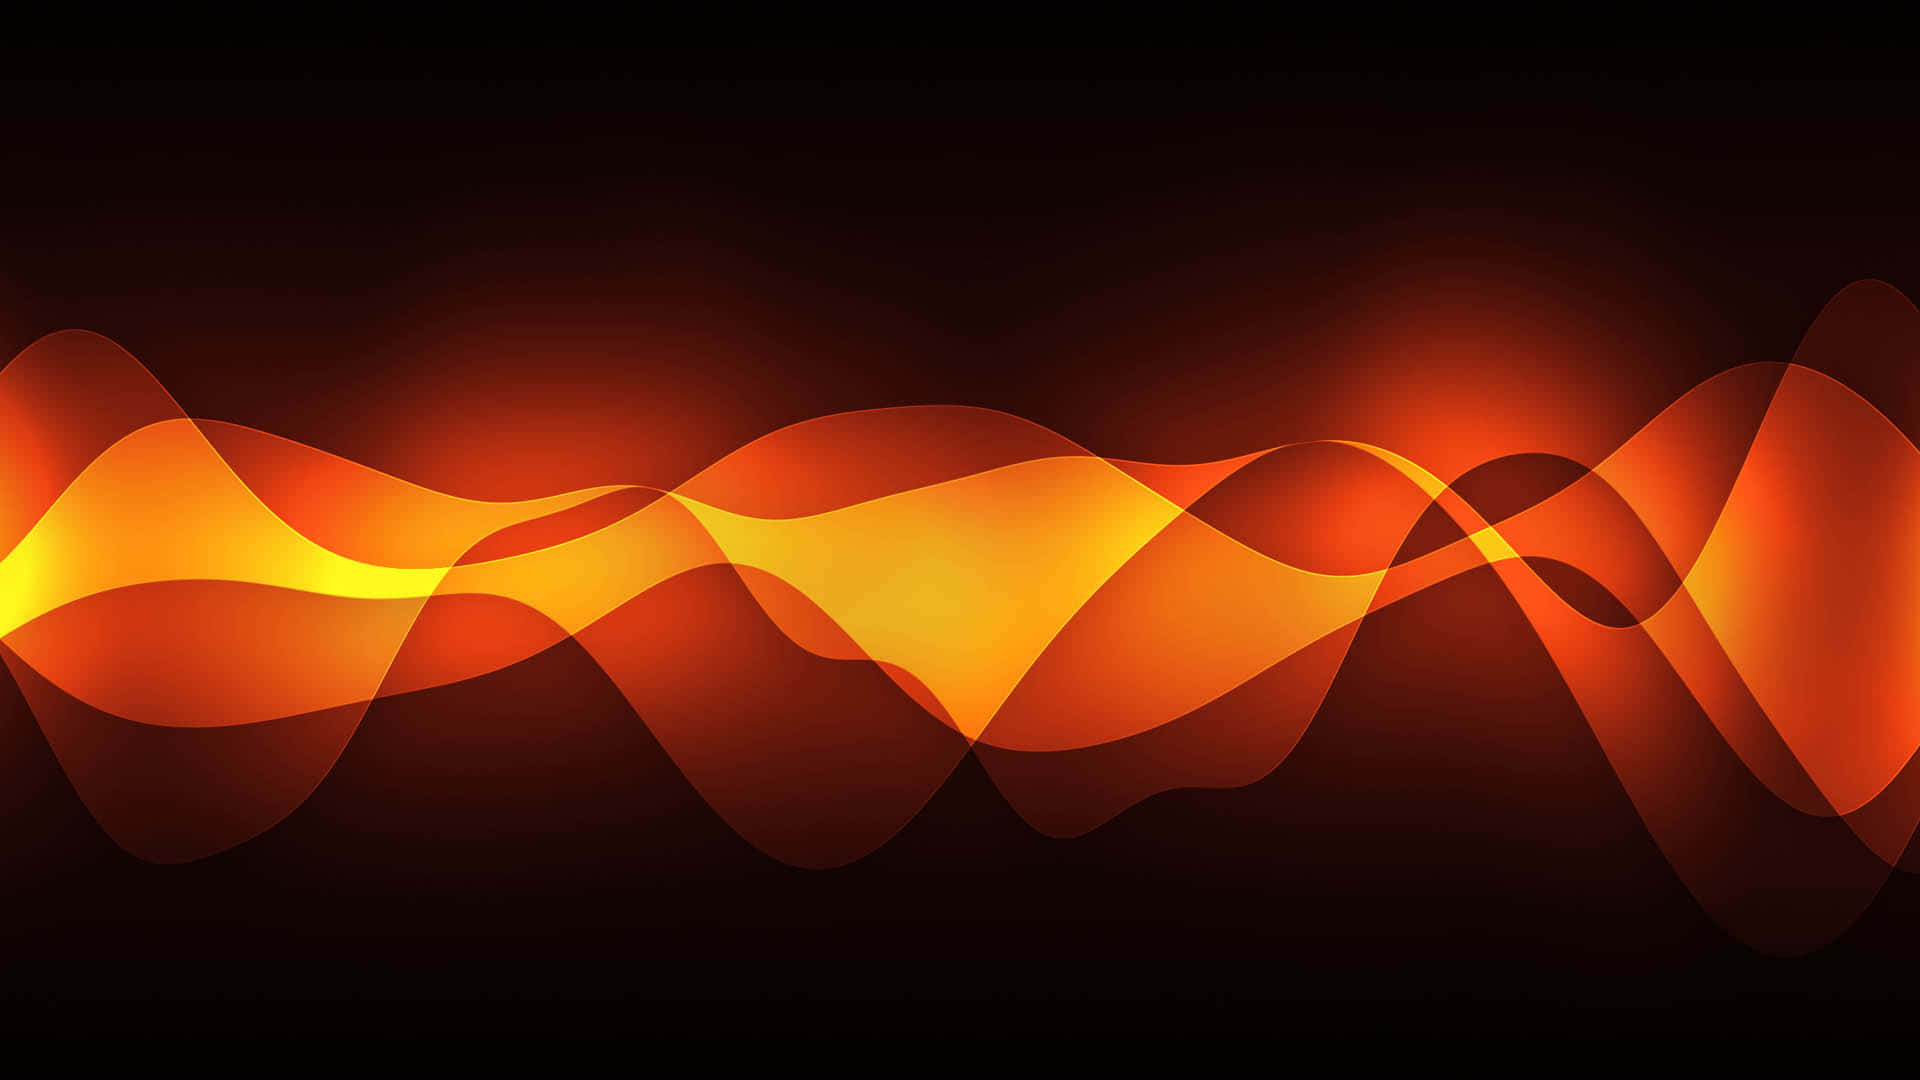 A Sound Wave With Orange And Yellow Colors Wallpaper